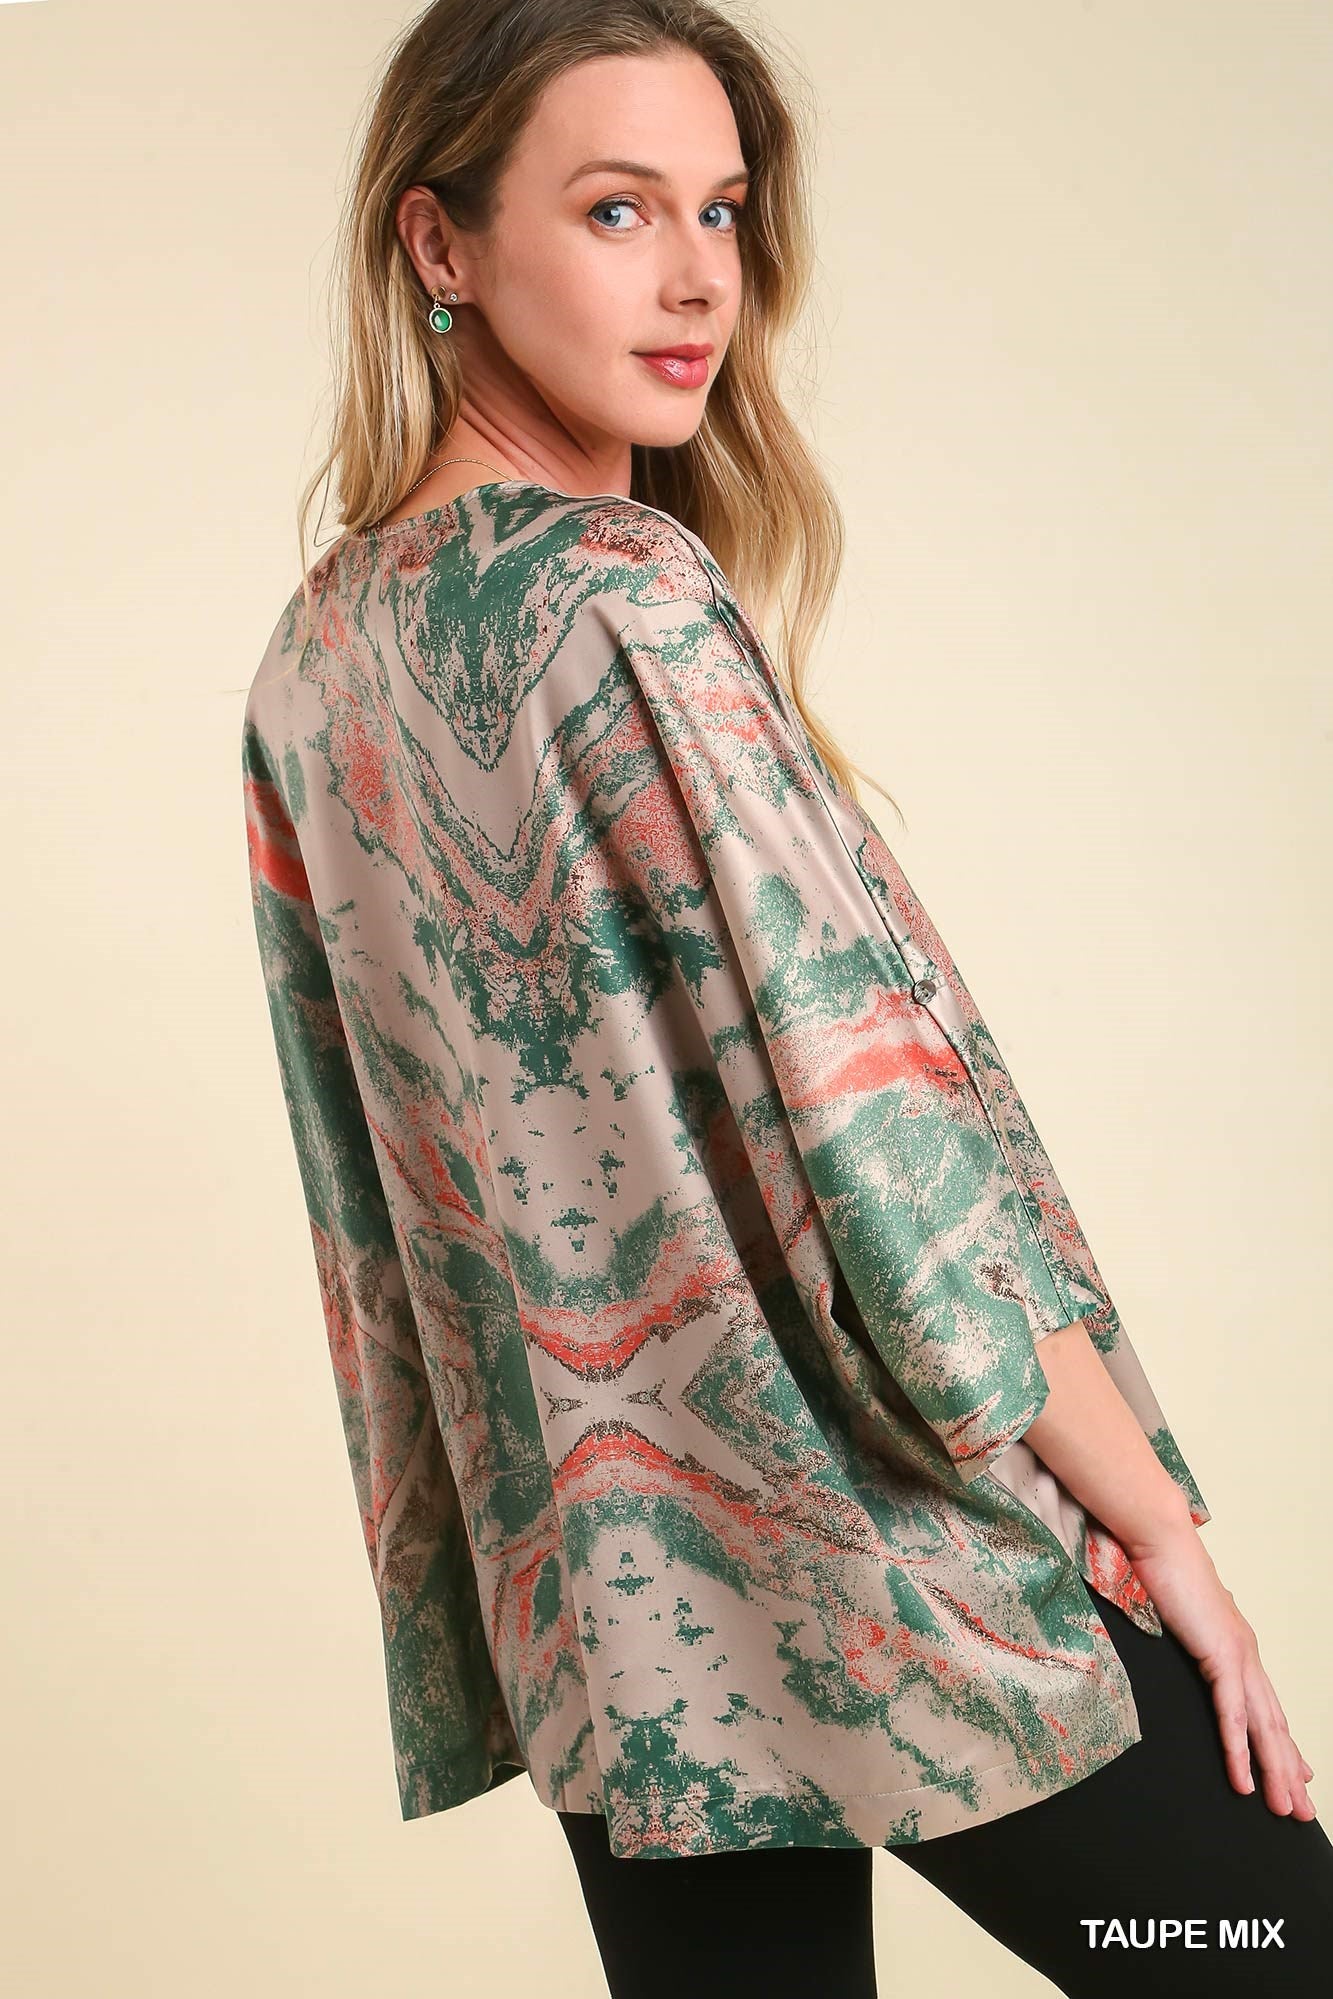 Umgee Mix Marble Print Batwing High Low Hem Top - Roulhac Fashion Boutique